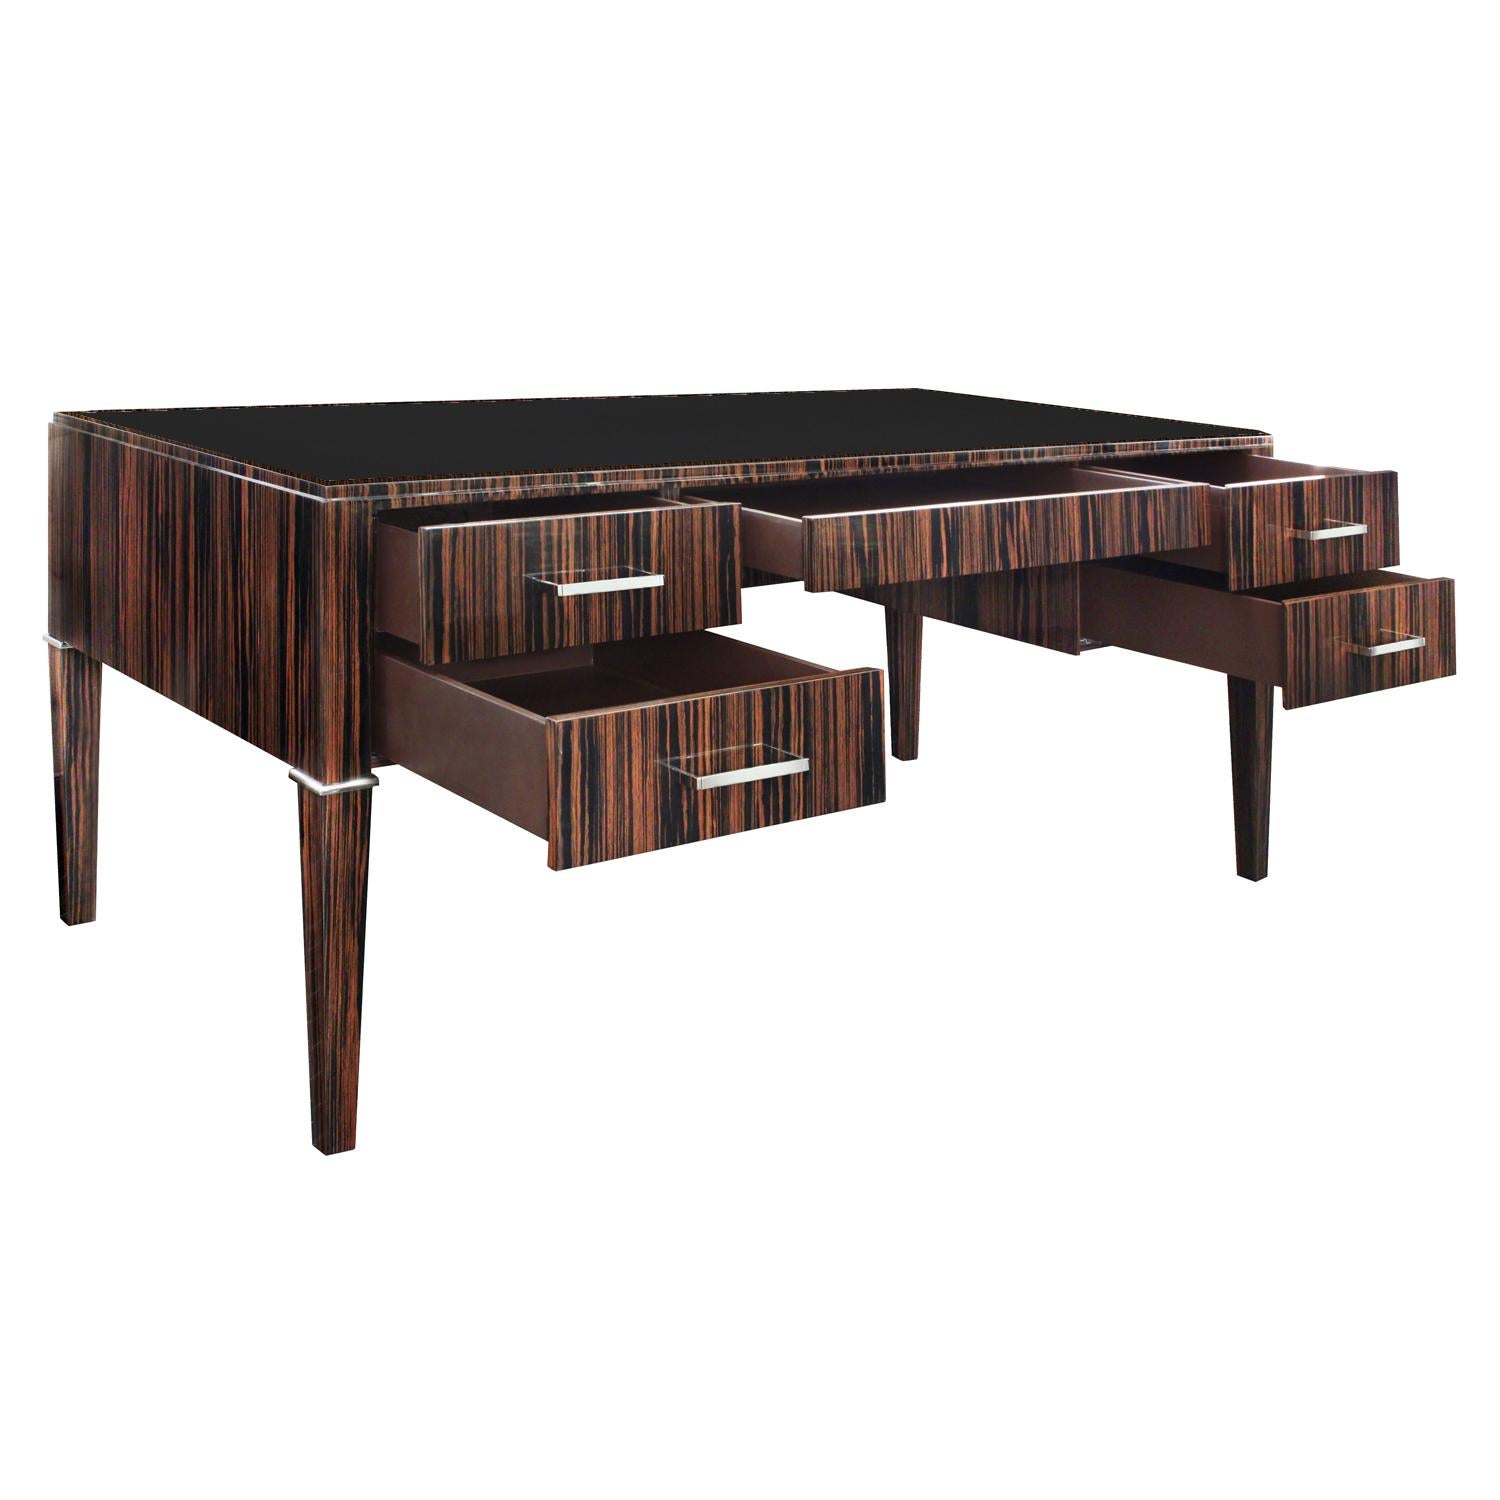 American Lobel Originals Desk in Macassar Ebony with Leather Top, Made to Order For Sale